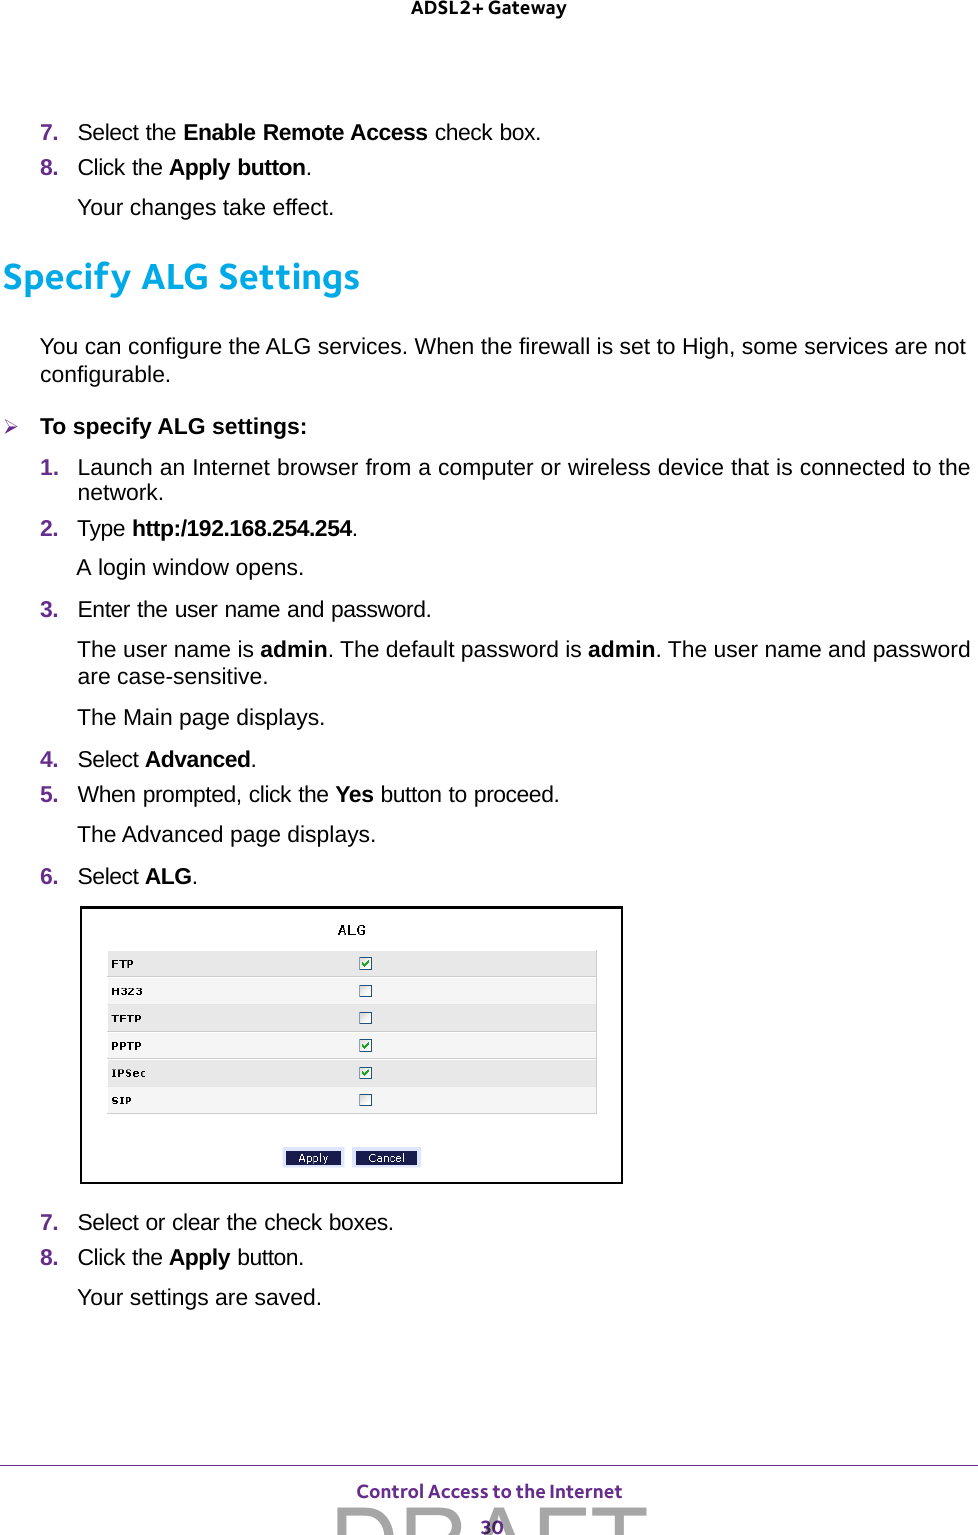 Control Access to the Internet 30ADSL2+ Gateway 7.  Select the Enable Remote Access check box.8.  Click the Apply button.Your changes take effect.Specify ALG SettingsYou can configure the ALG services. When the firewall is set to High, some services are not configurable.To specify ALG settings:1.  Launch an Internet browser from a computer or wireless device that is connected to the network.2.  Type http:/192.168.254.254.A login window opens.3.  Enter the user name and password.The user name is admin. The default password is admin. The user name and password are case-sensitive.The Main page displays.4.  Select Advanced.5.  When prompted, click the Yes button to proceed.The Advanced page displays.6.  Select ALG.7.  Select or clear the check boxes.8.  Click the Apply button.Your settings are saved.DRAFT